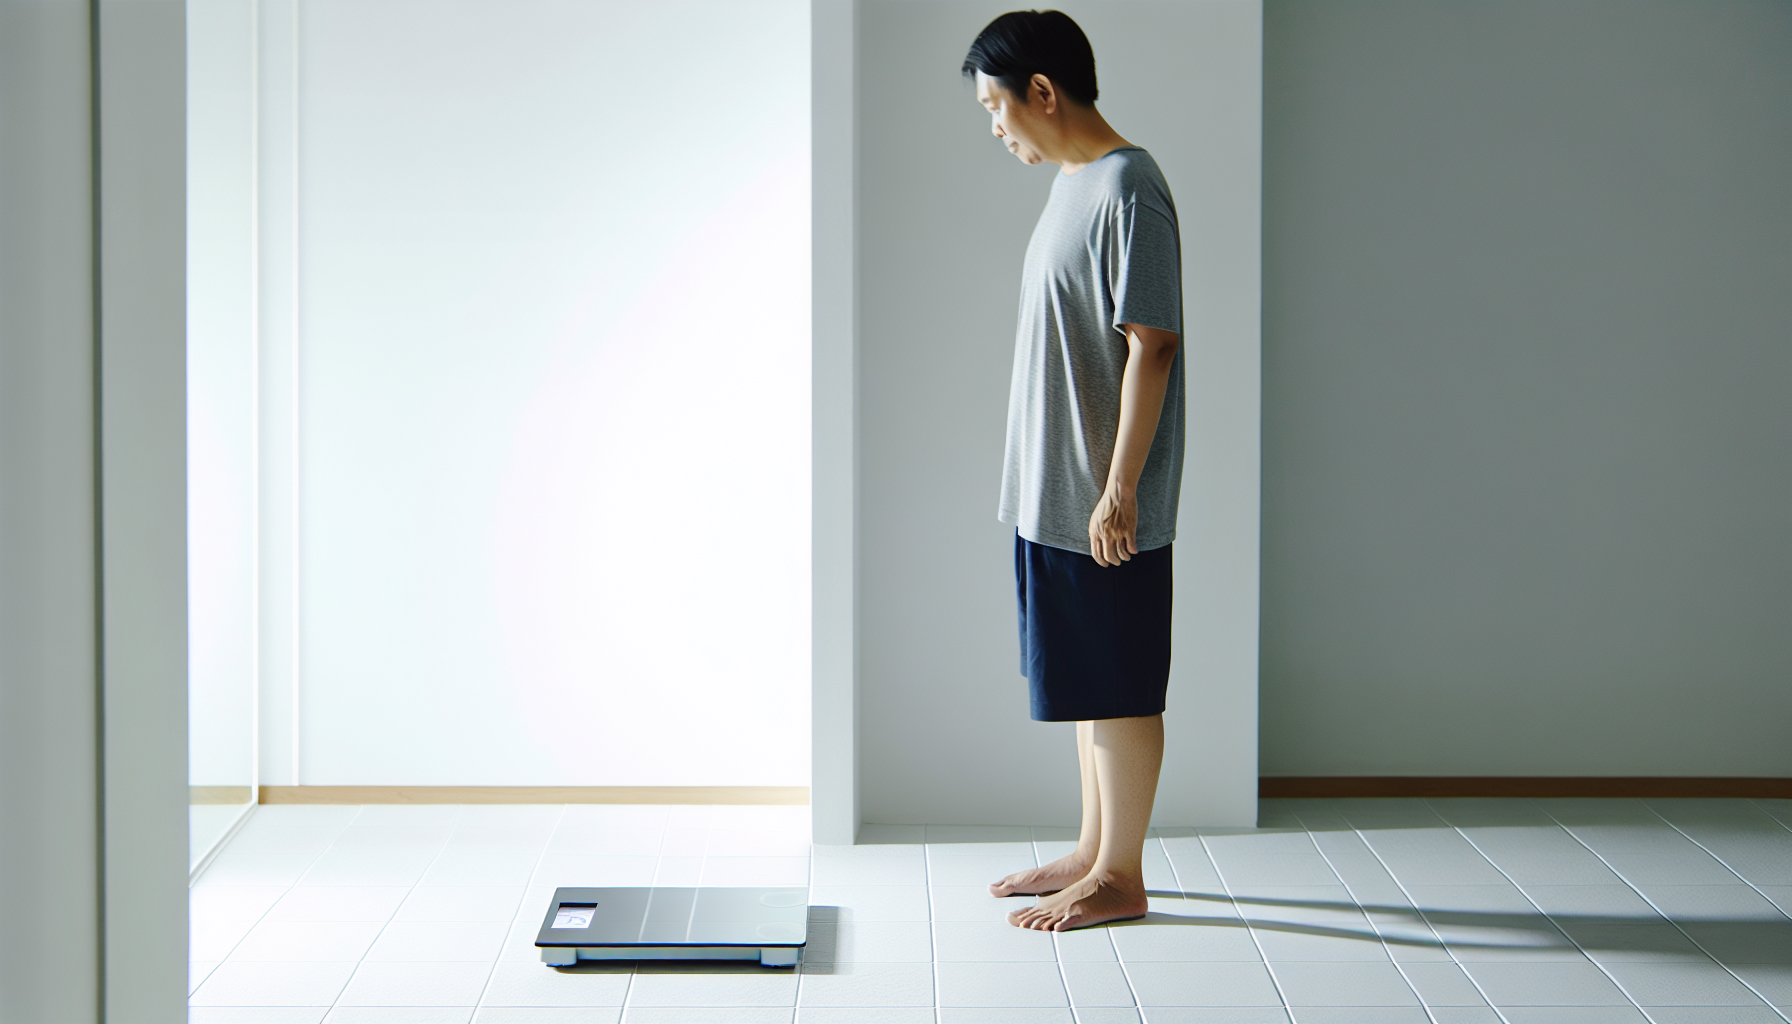 Photo of a person using a modern digital weighing scale